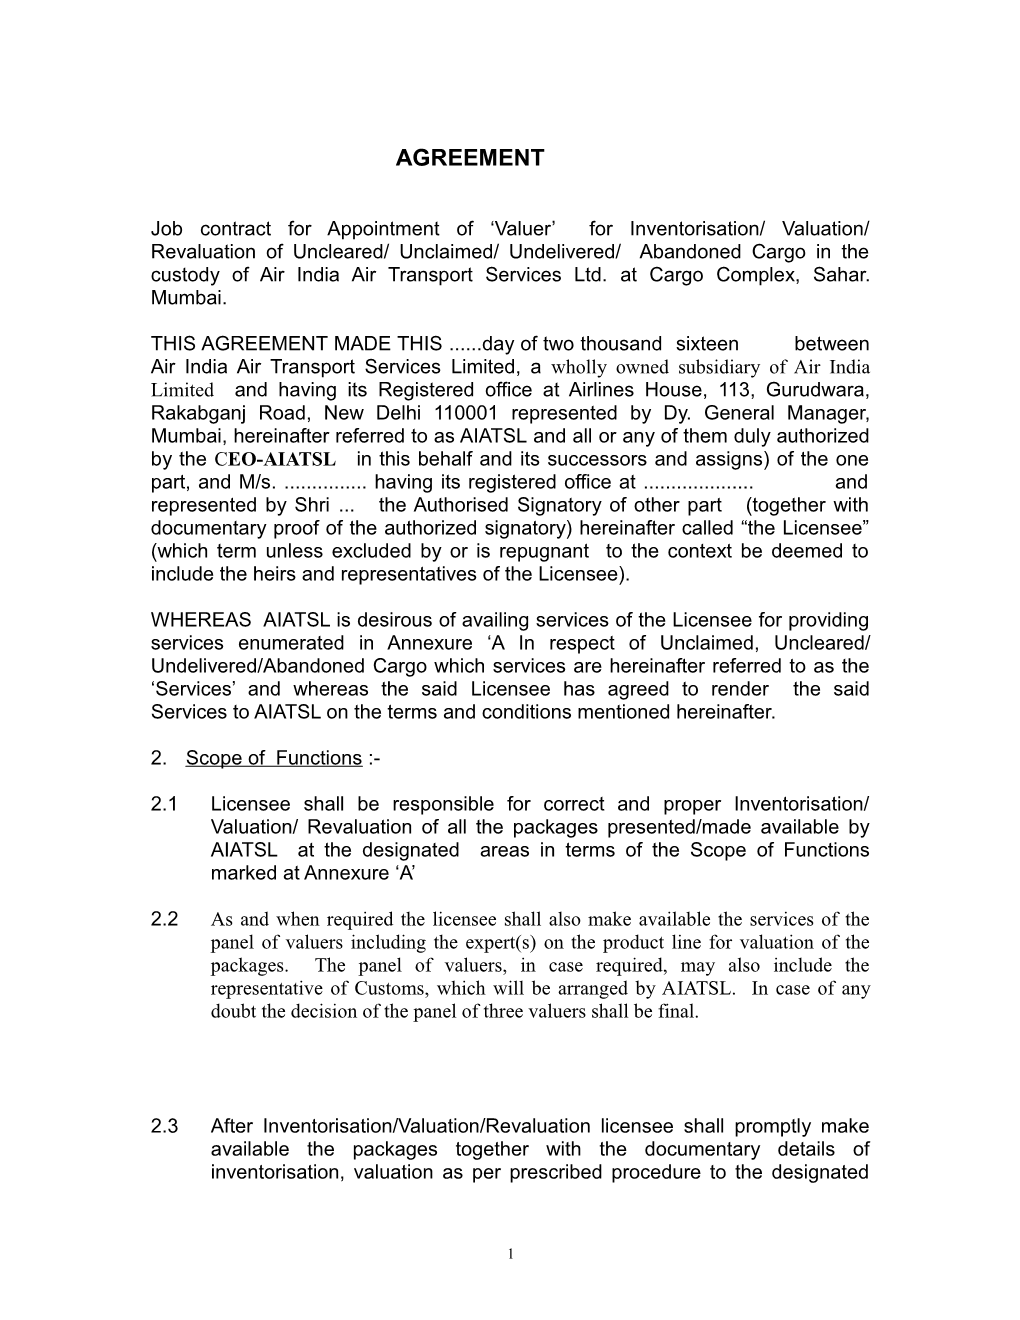 Job Contract for Appointment of Valuer for Inventorisation/ Valuation/ Revaluation of Uncleared